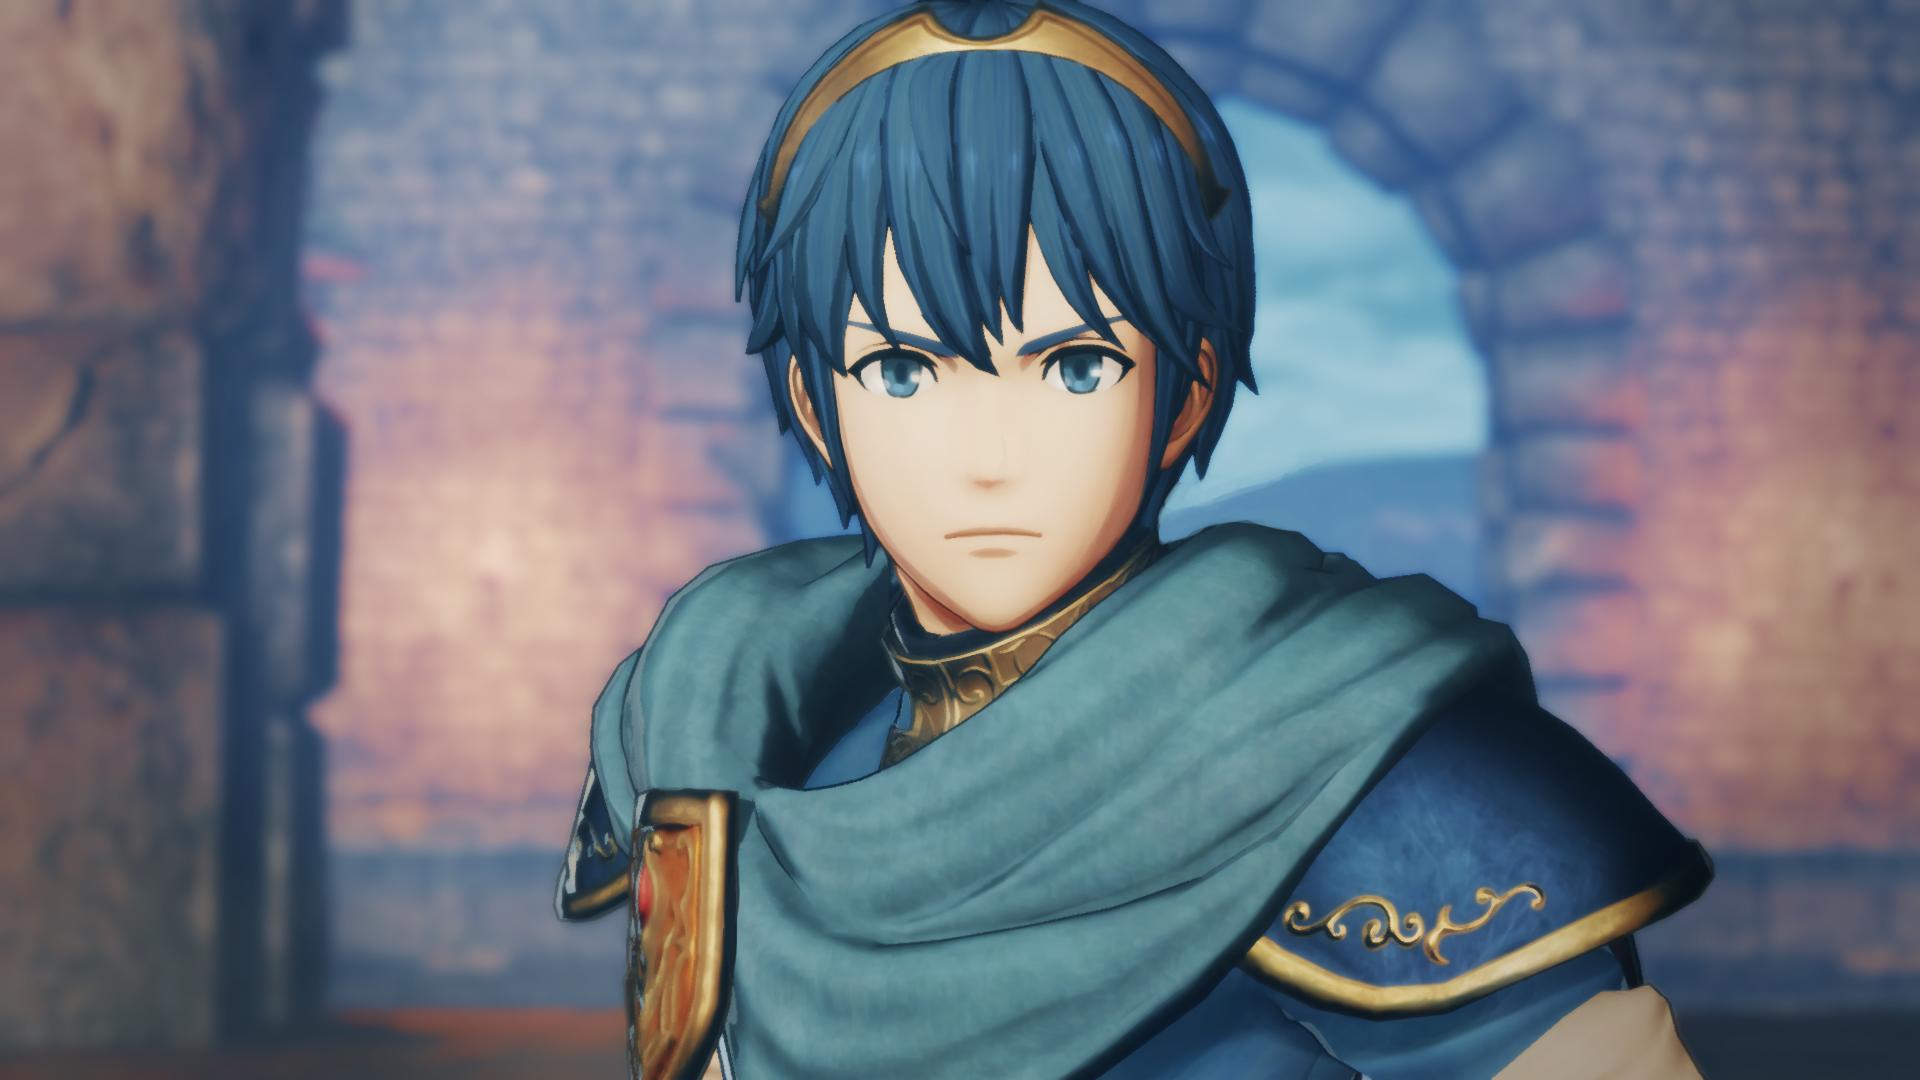 Image for Fire Emblem Warriors video features new gameplay and short tutorial on the mechanics